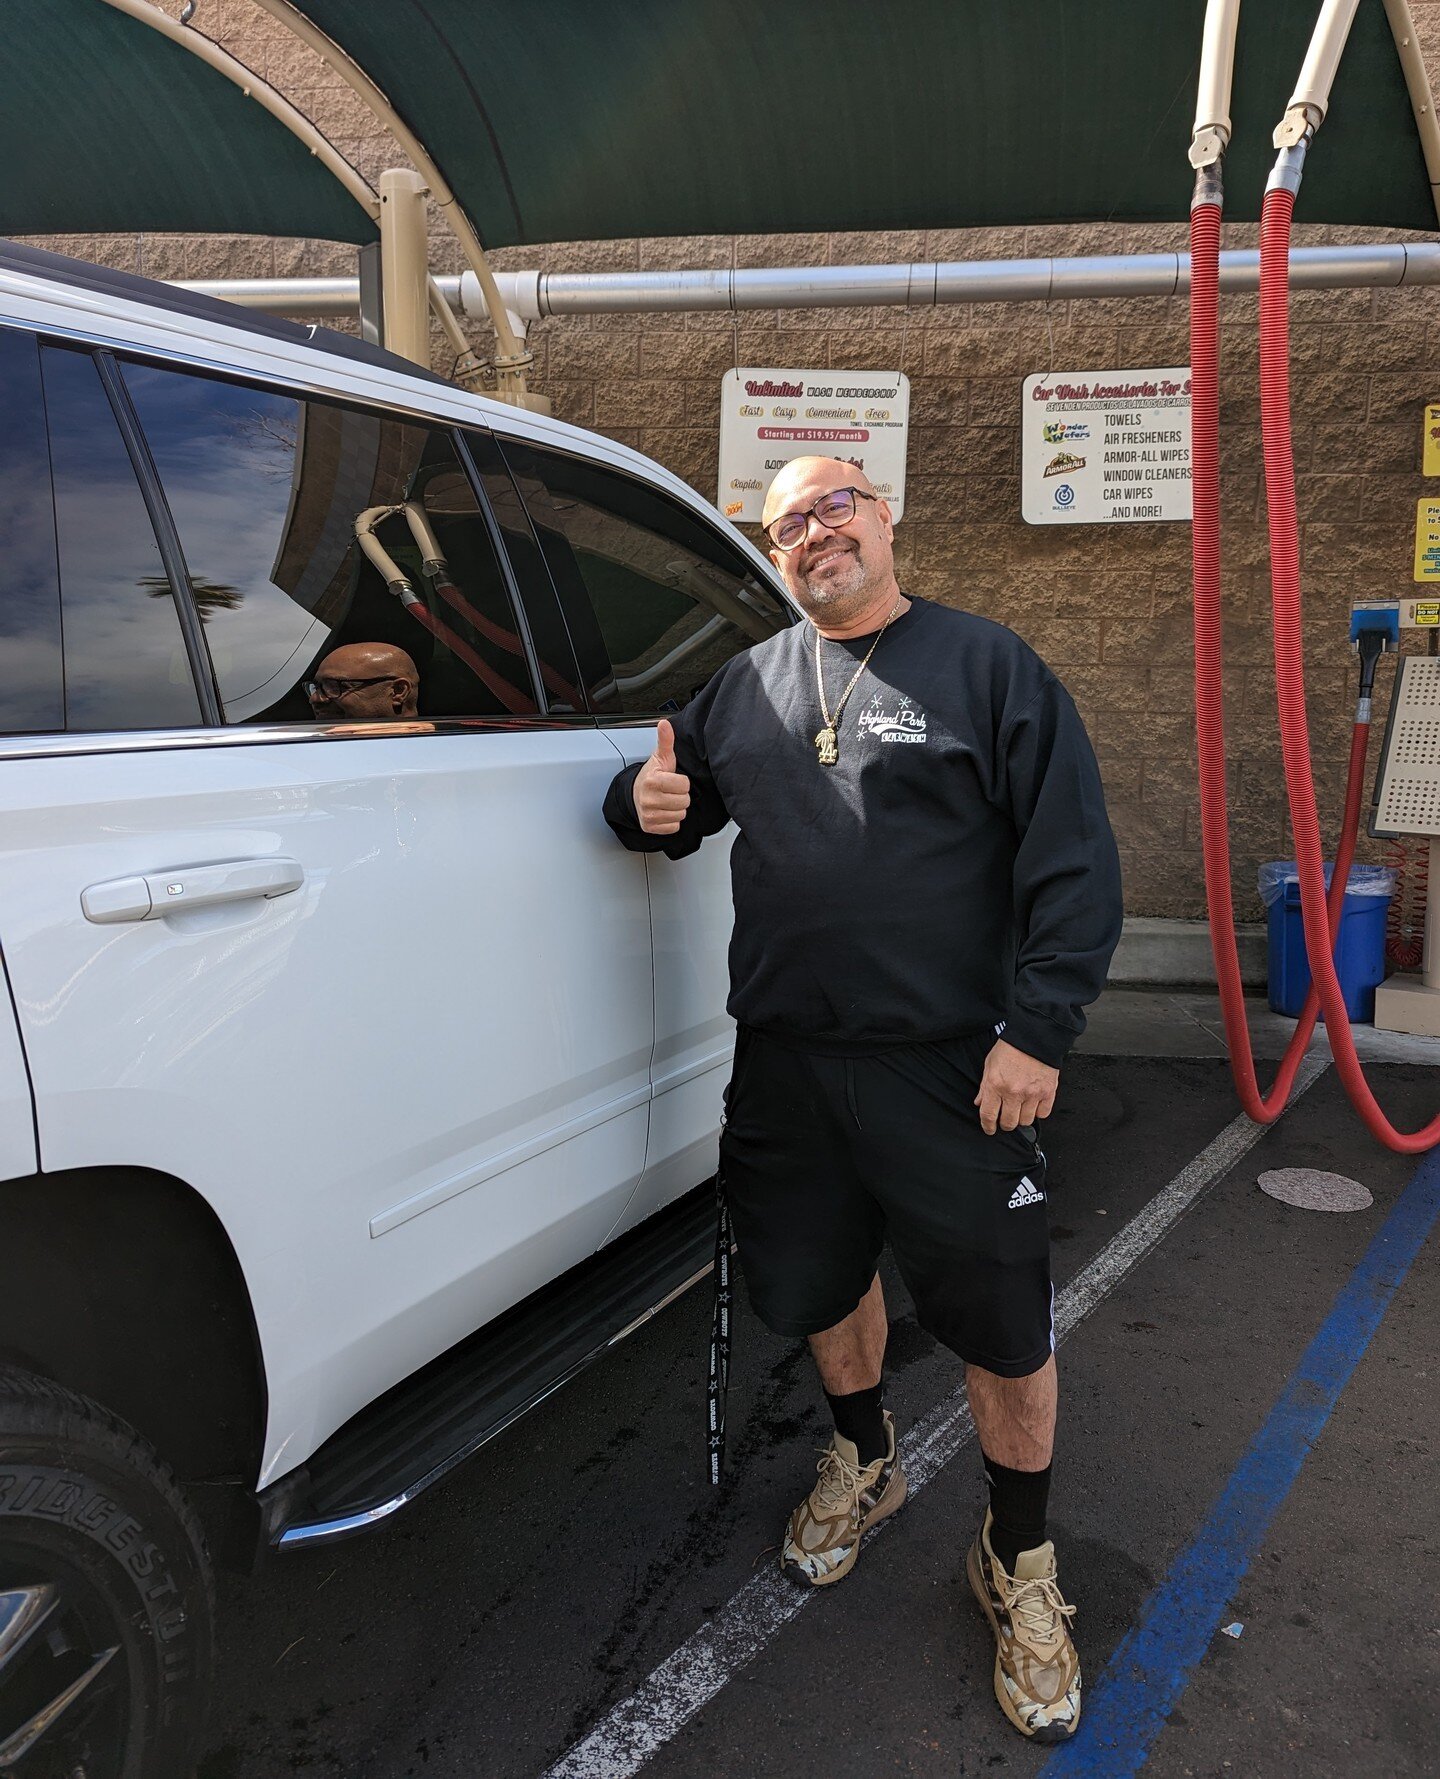 Hey Willy, nice sweater!😎 Willy has been a member here at Highland Park Car Wash since DAY 1.  Thank you for letting us keep your ride fresh and clean🧼⁠
-⁠
-⁠
#90042  #carwash #cleancar #eaglerock #explorela #expresscarwash #happycar #happeningdtla